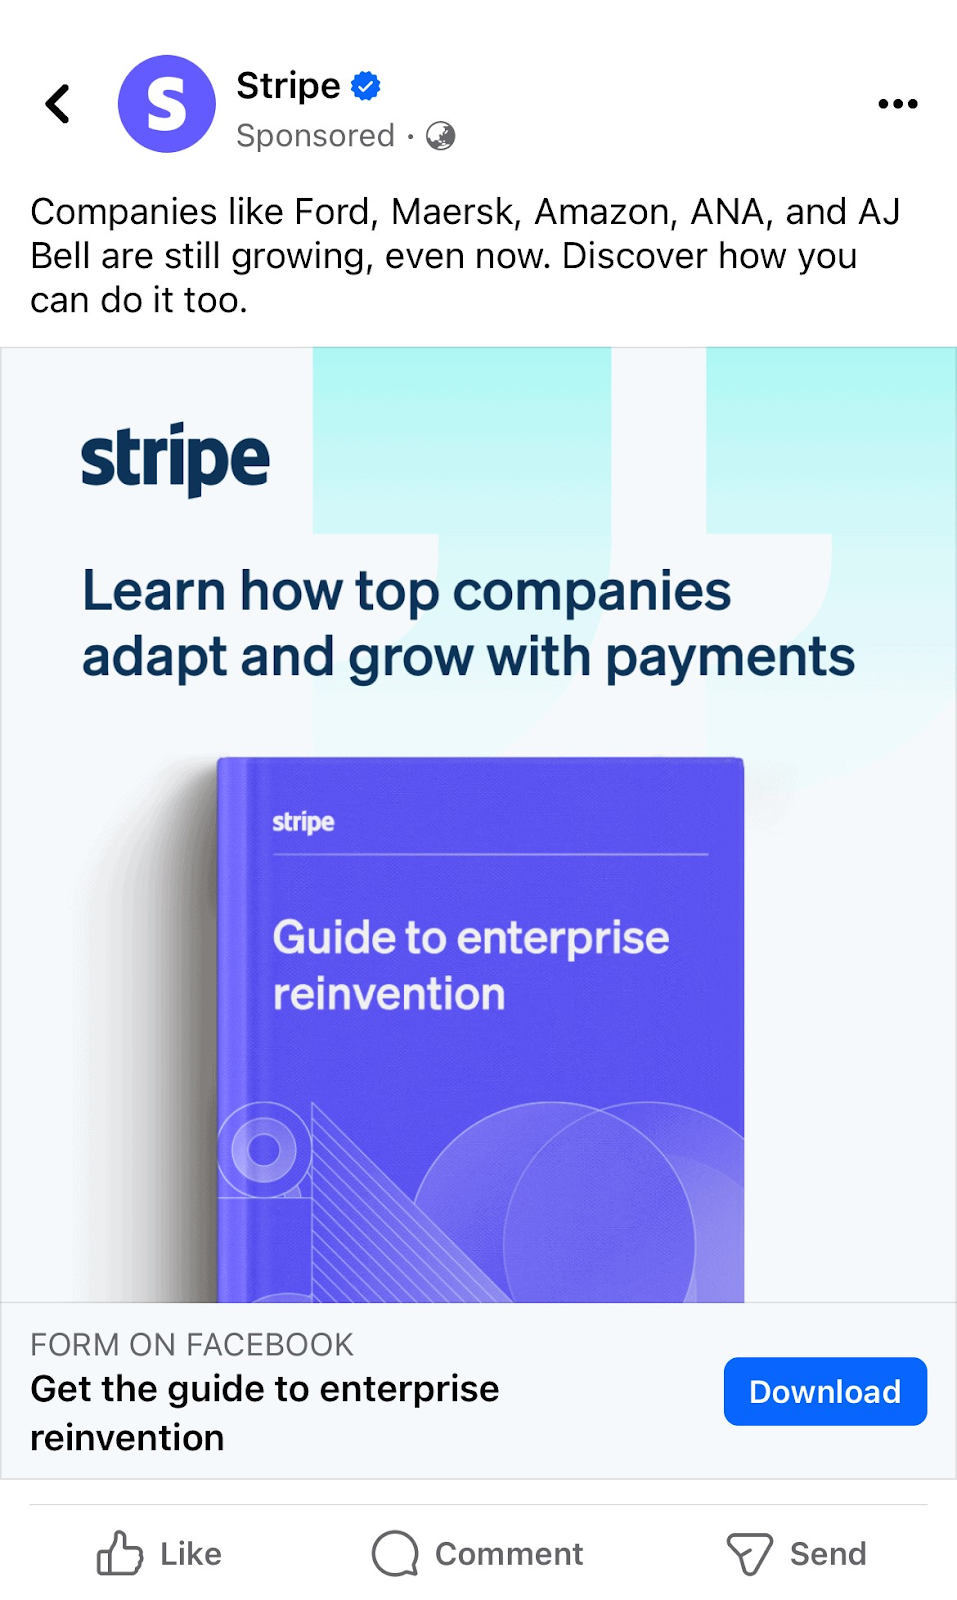 A Facebook feed ad for Stripe